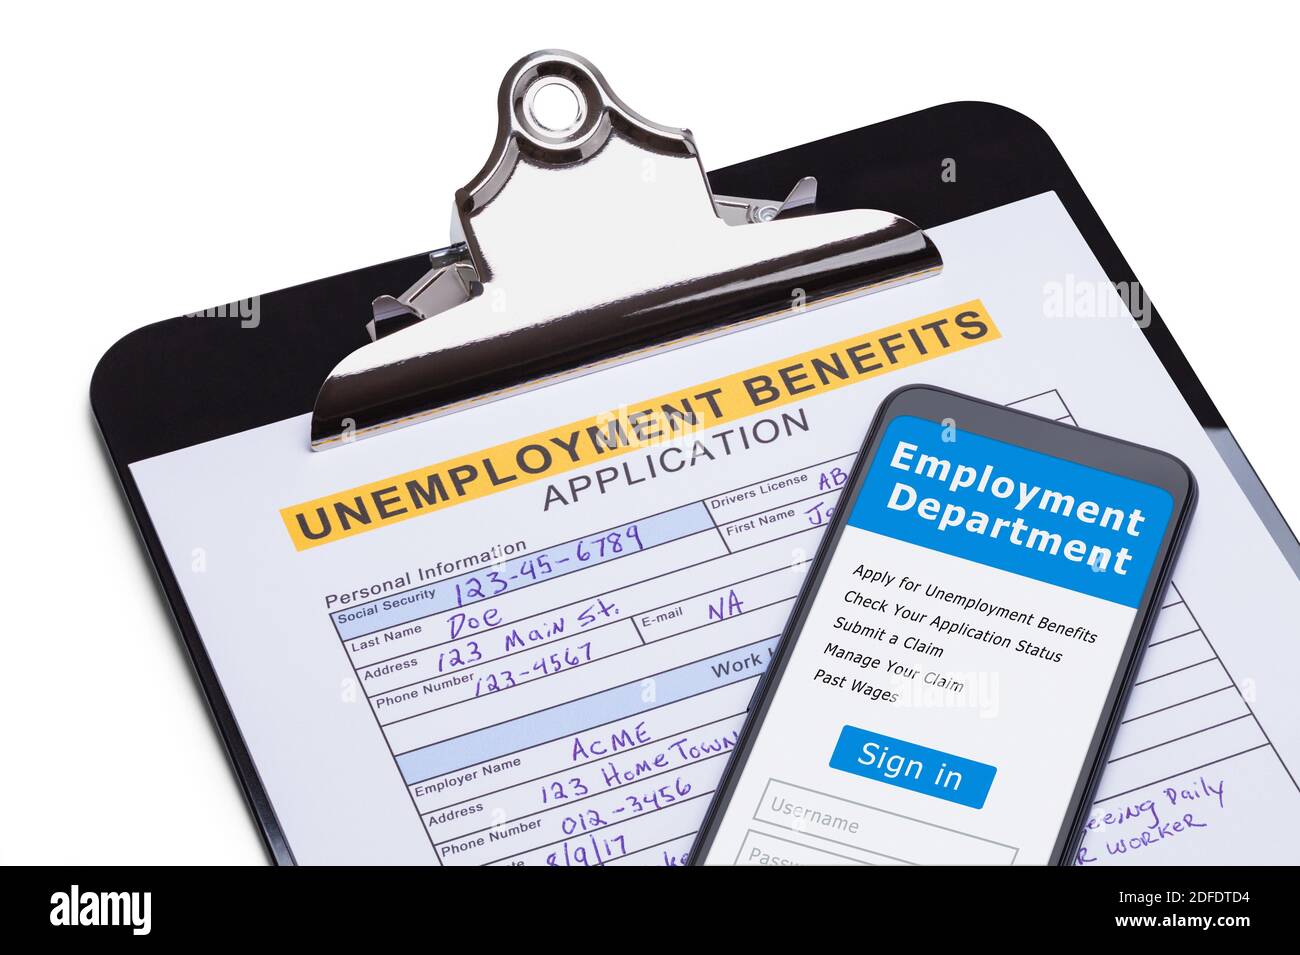 Unemployment Benefits Application with Smart Phone. Stock Photo